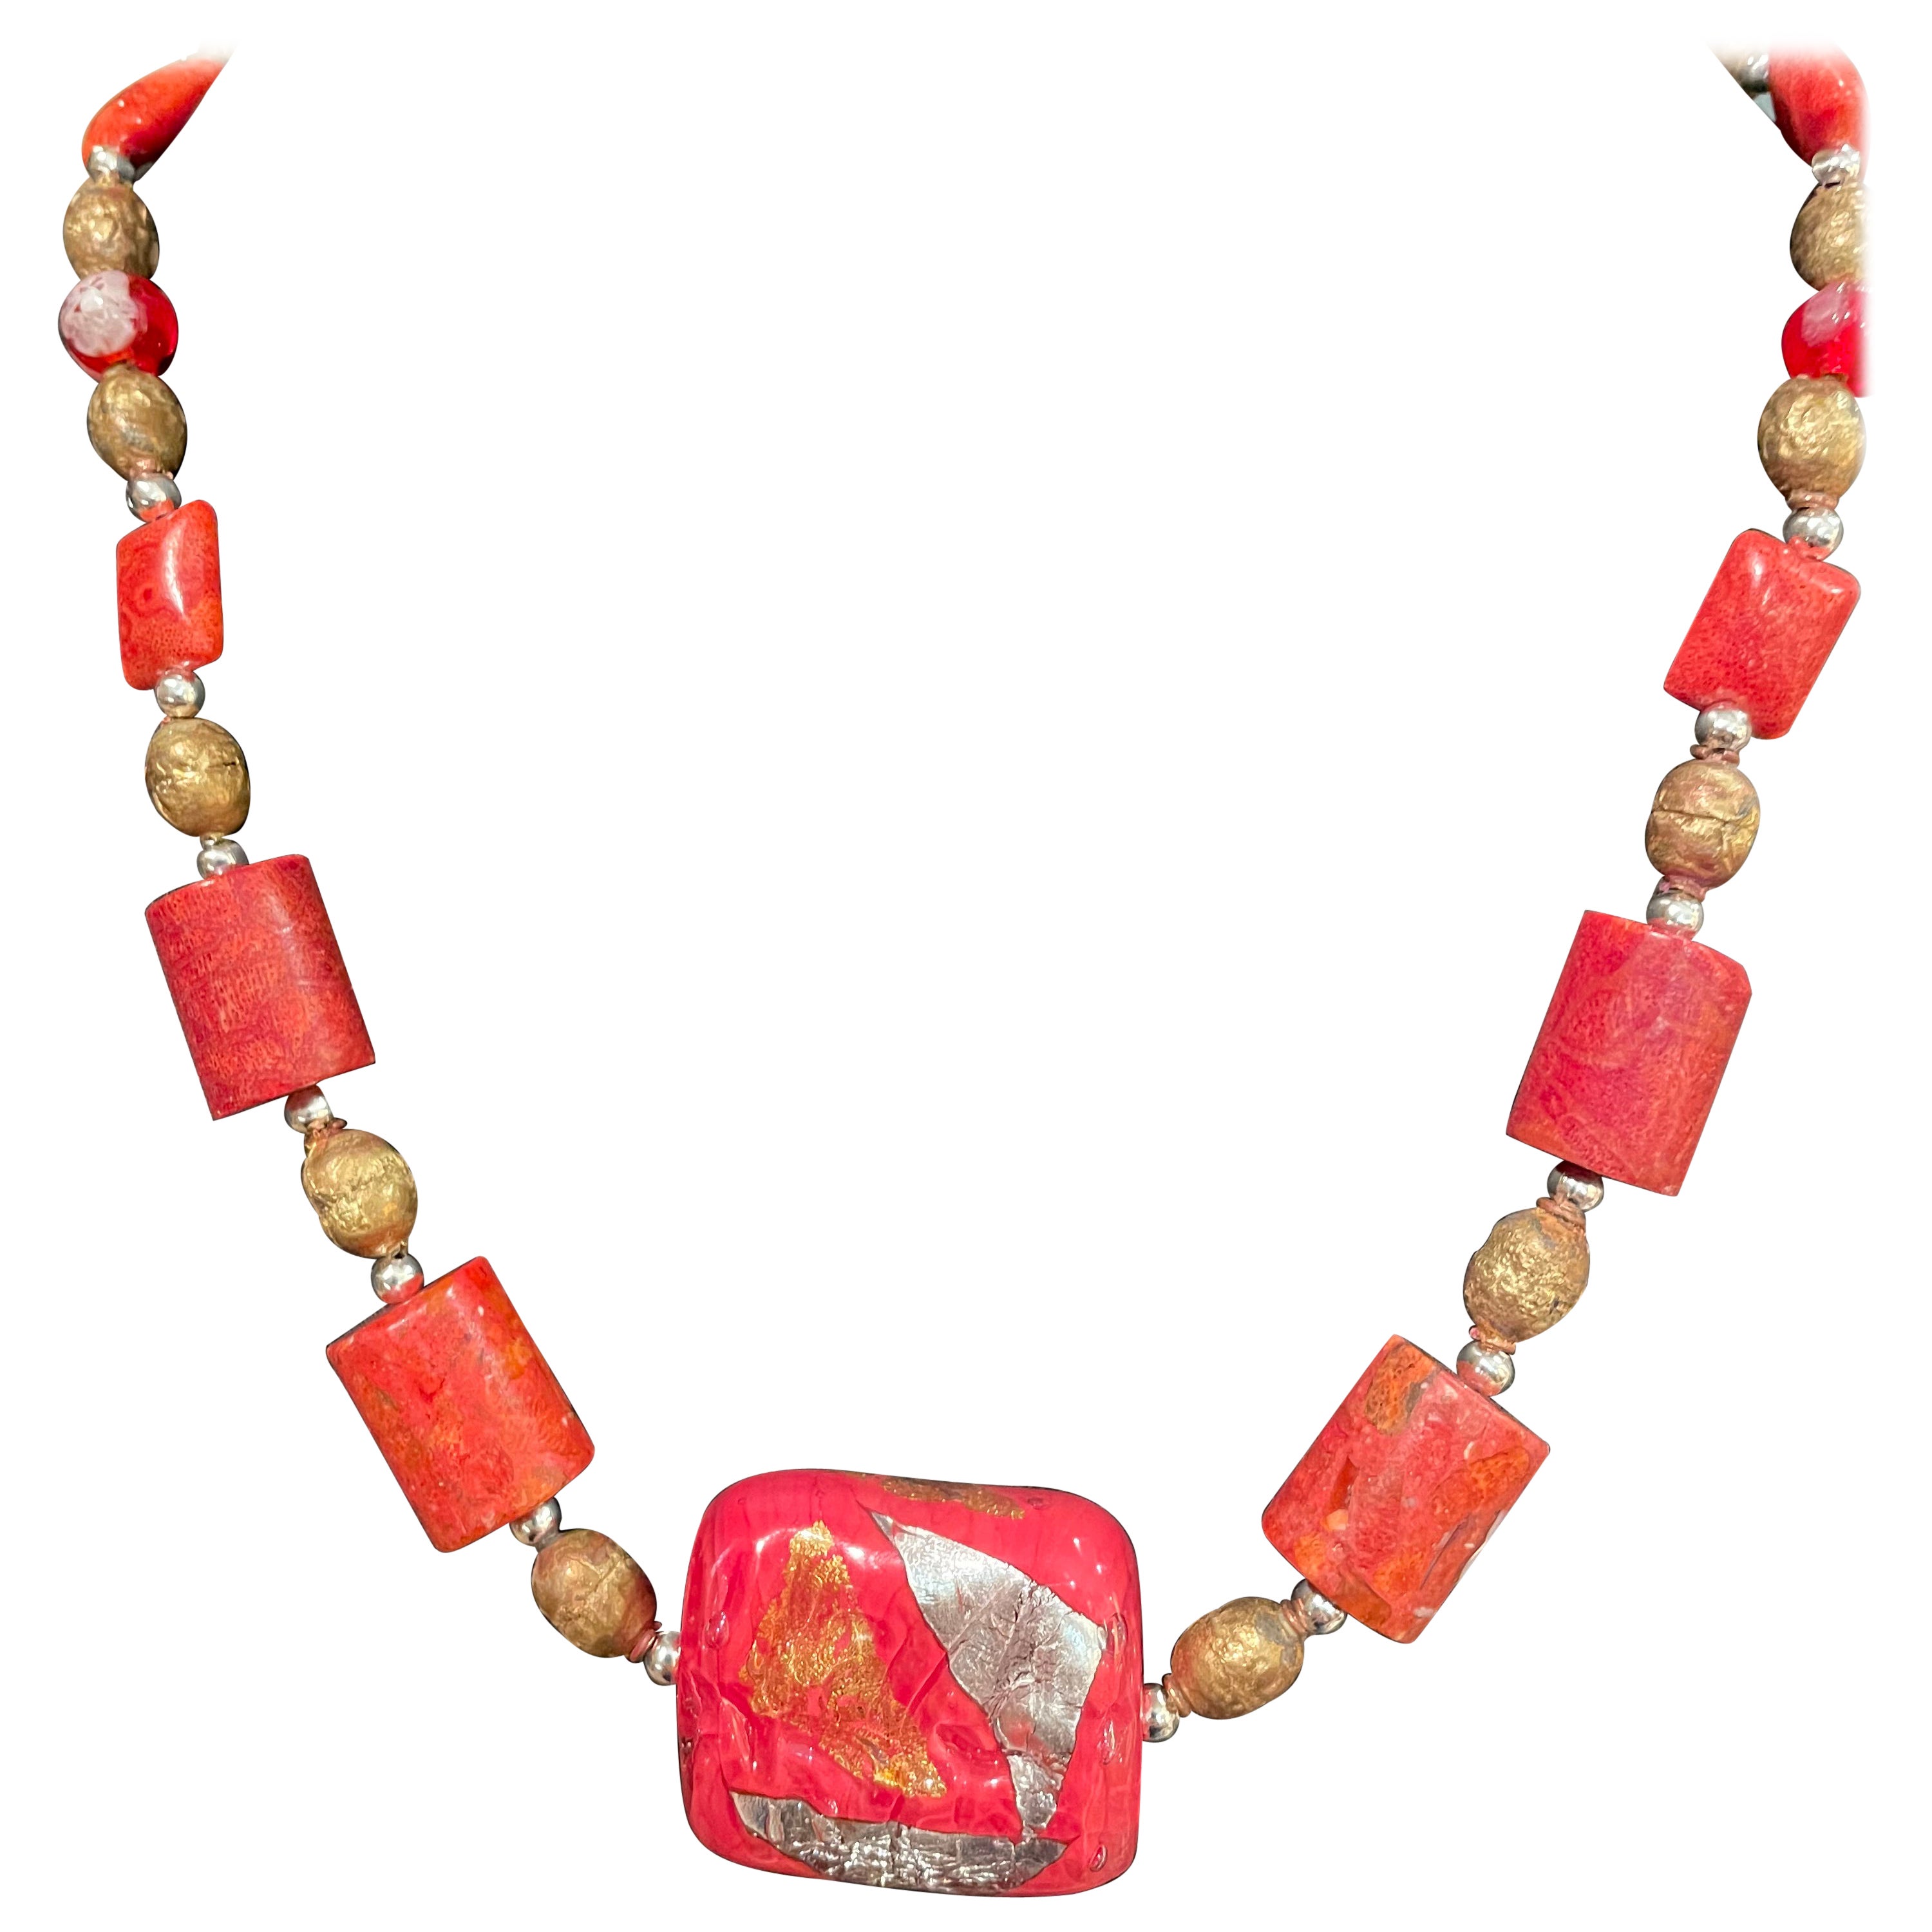 LB offers a handmade, one of a kind, Venetian bead and coral necklace with brass For Sale